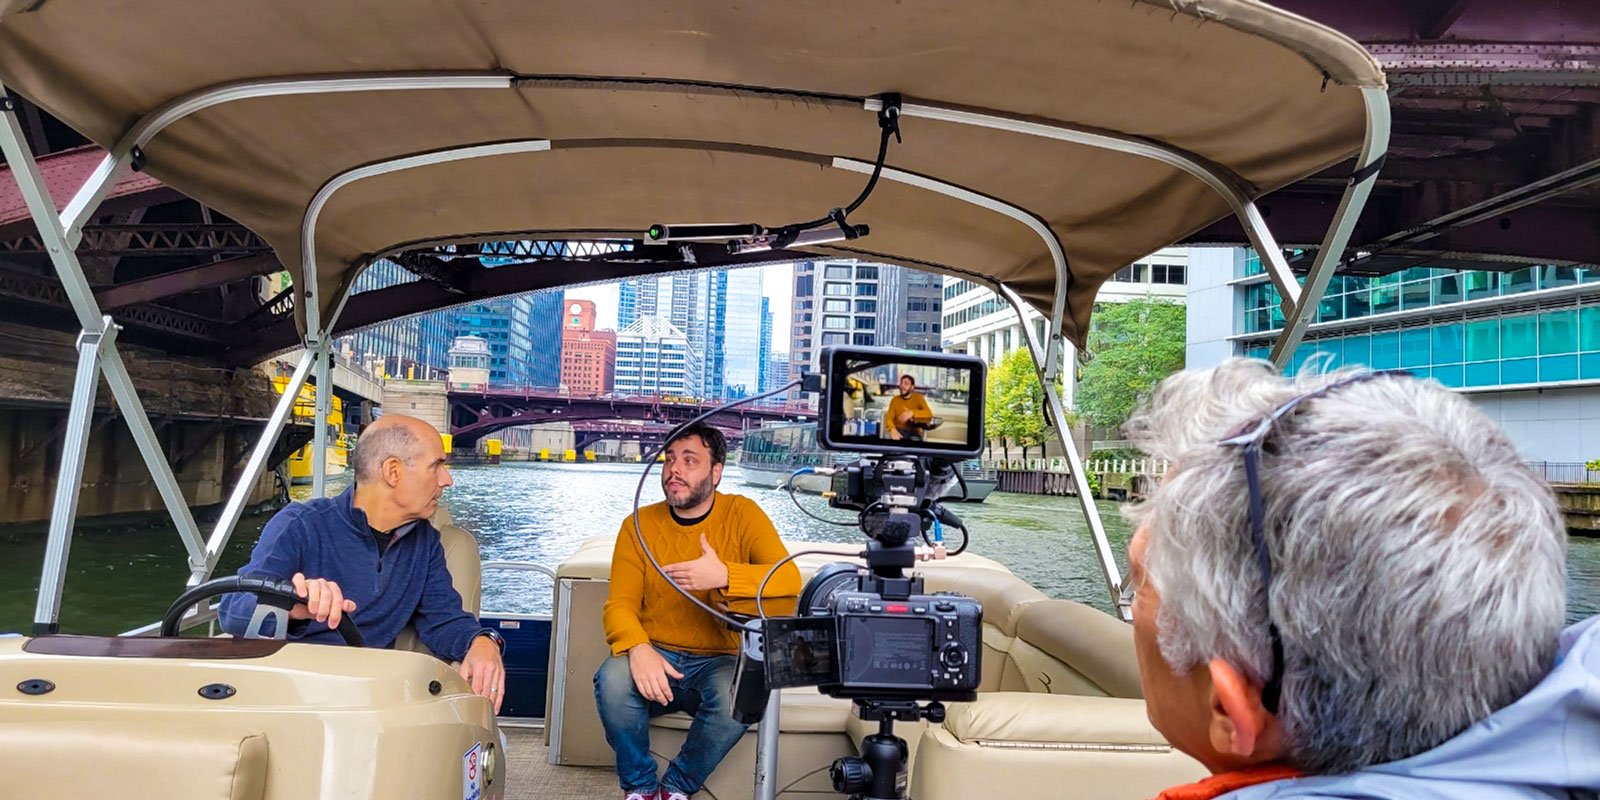 Oral User, right, films Mark Chrisler and Geoffrey Baer on the Chicago River.